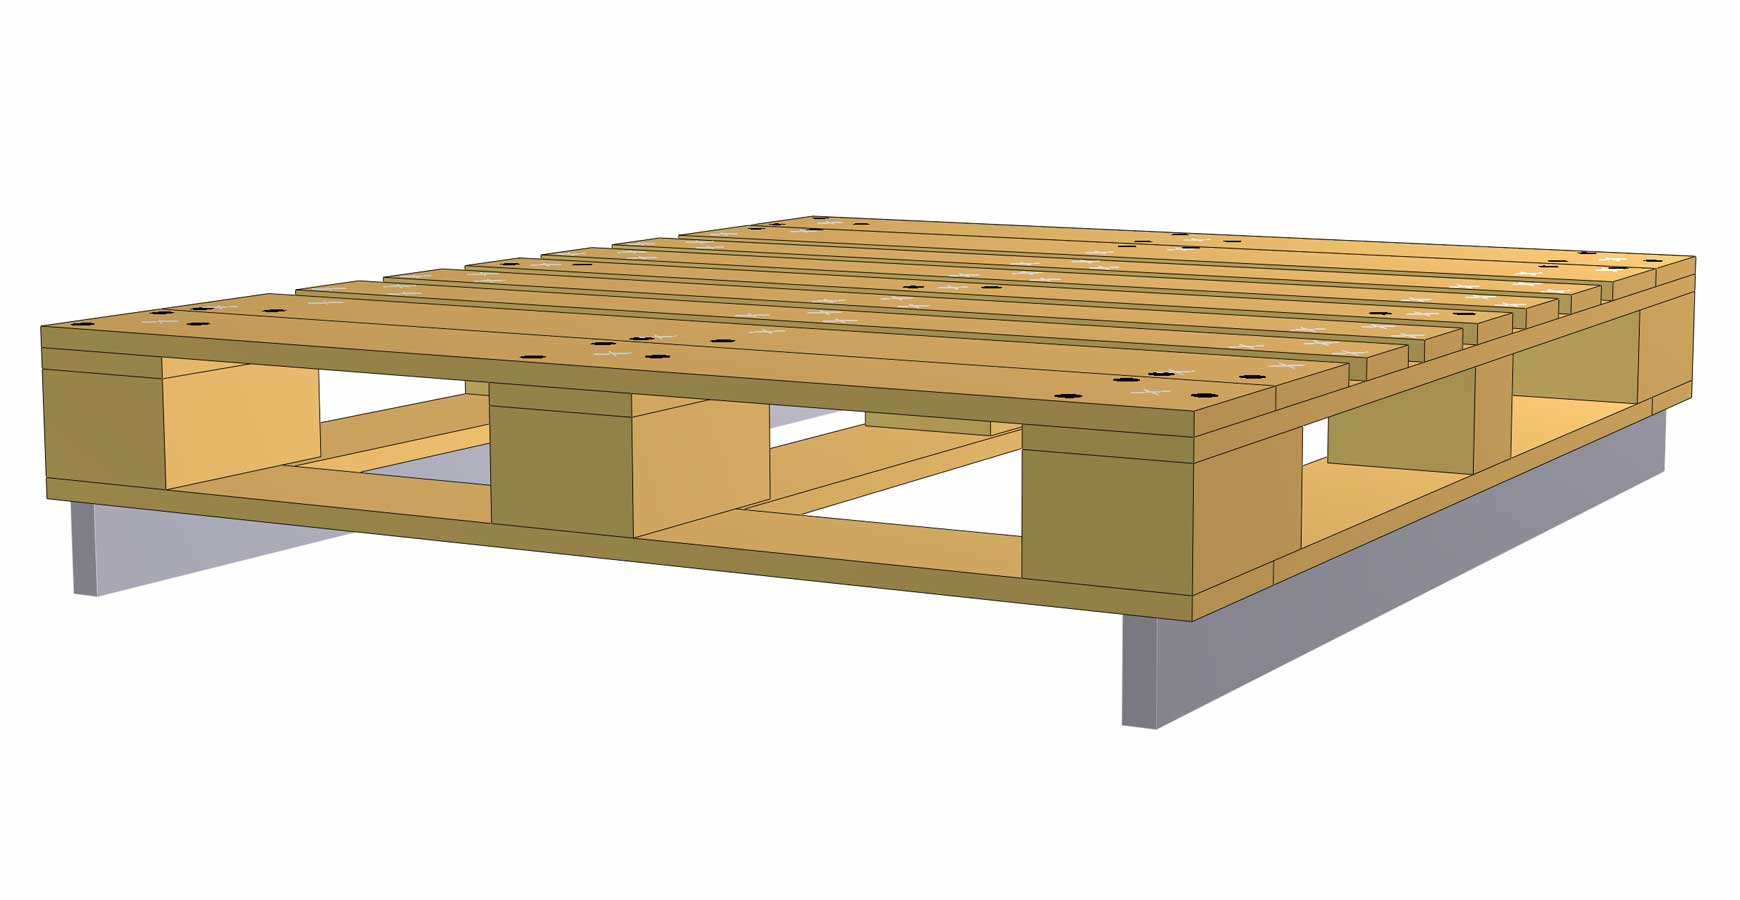 A three quarter view of a computer generated wooden pallet.